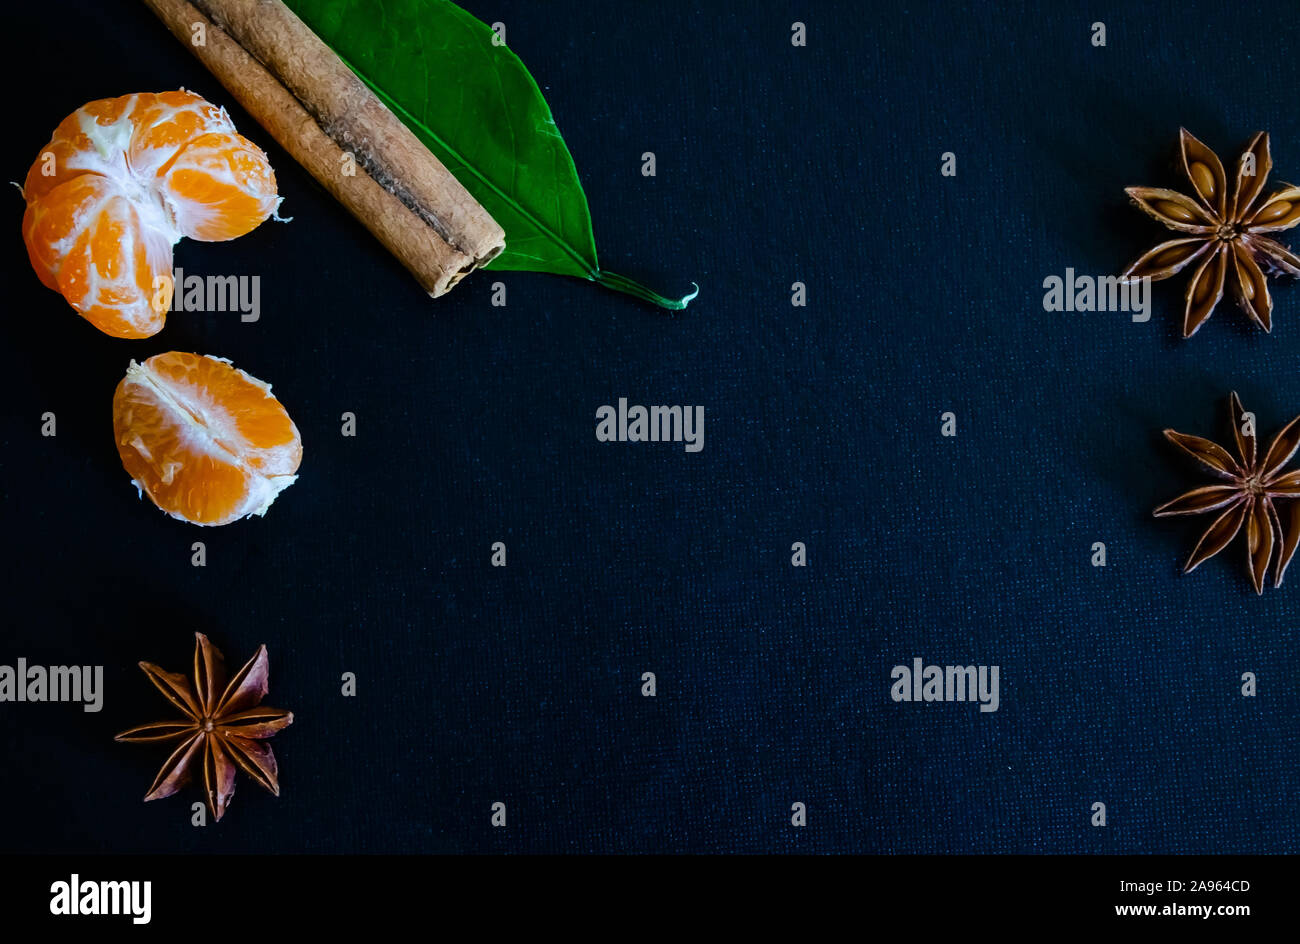 Dark textured christmas background with peeled tangerines, citrus leaves, star anise and cinnamon sticks. Background for banner, view from above. Stock Photo